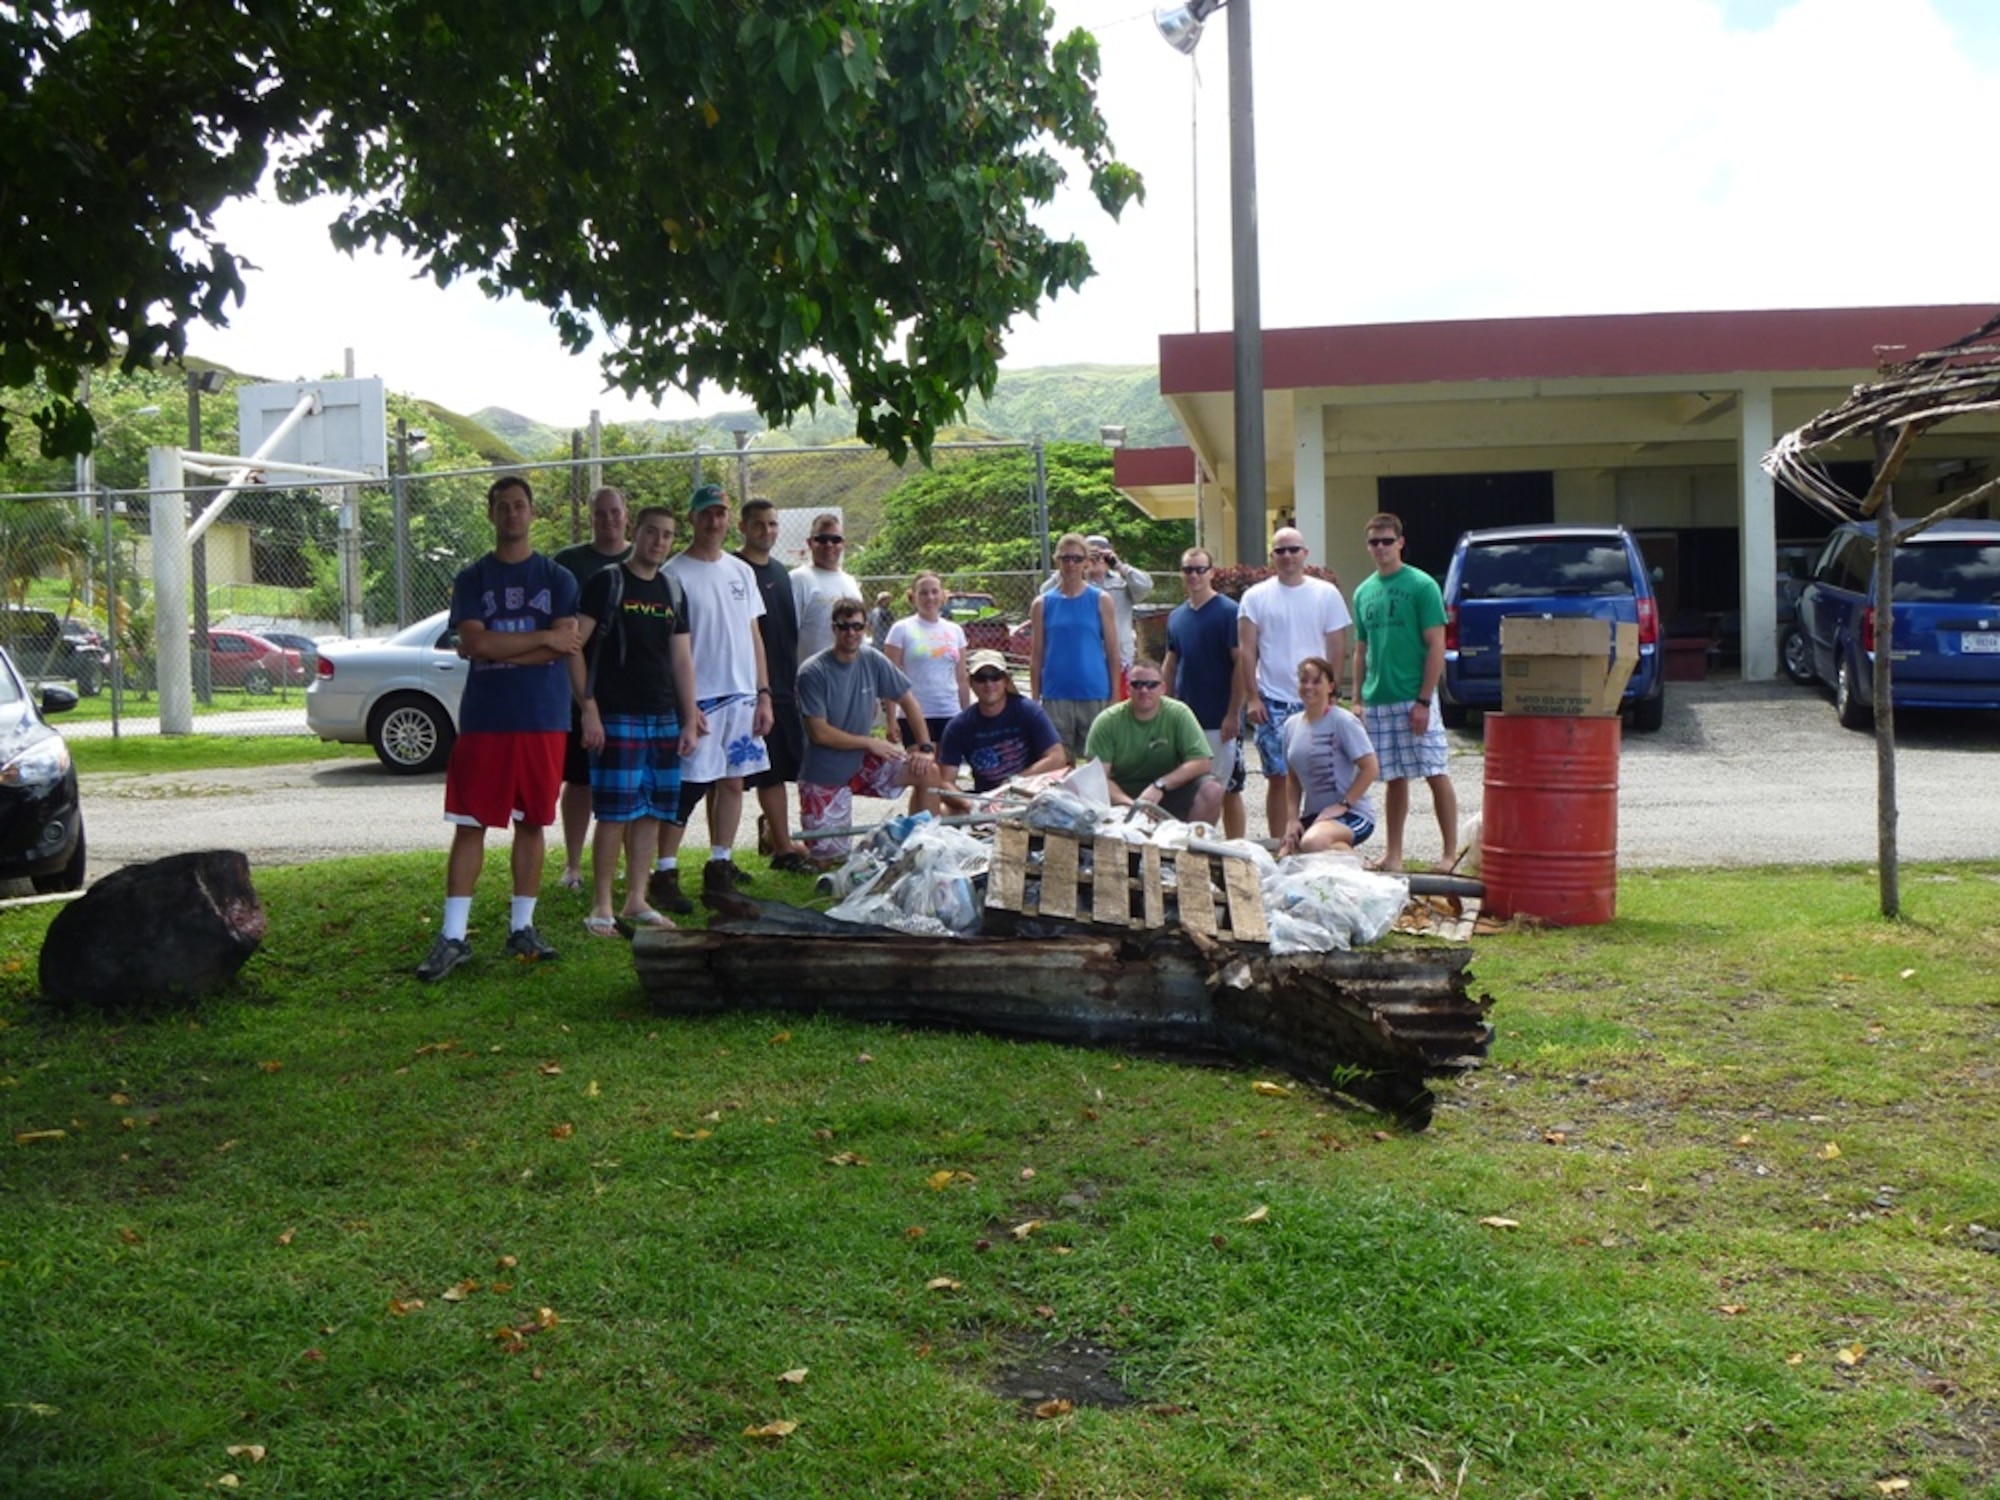 Since their arrival in April, members of the 96th Expeditionary Bomb Squadron began to improve the quality and safety of surrounding beaches by cleaning up garbage, debris and goods discarded after barbecues. Here, the unit poses with the day's collection. (U.S. Air Force Courtesy Photo)